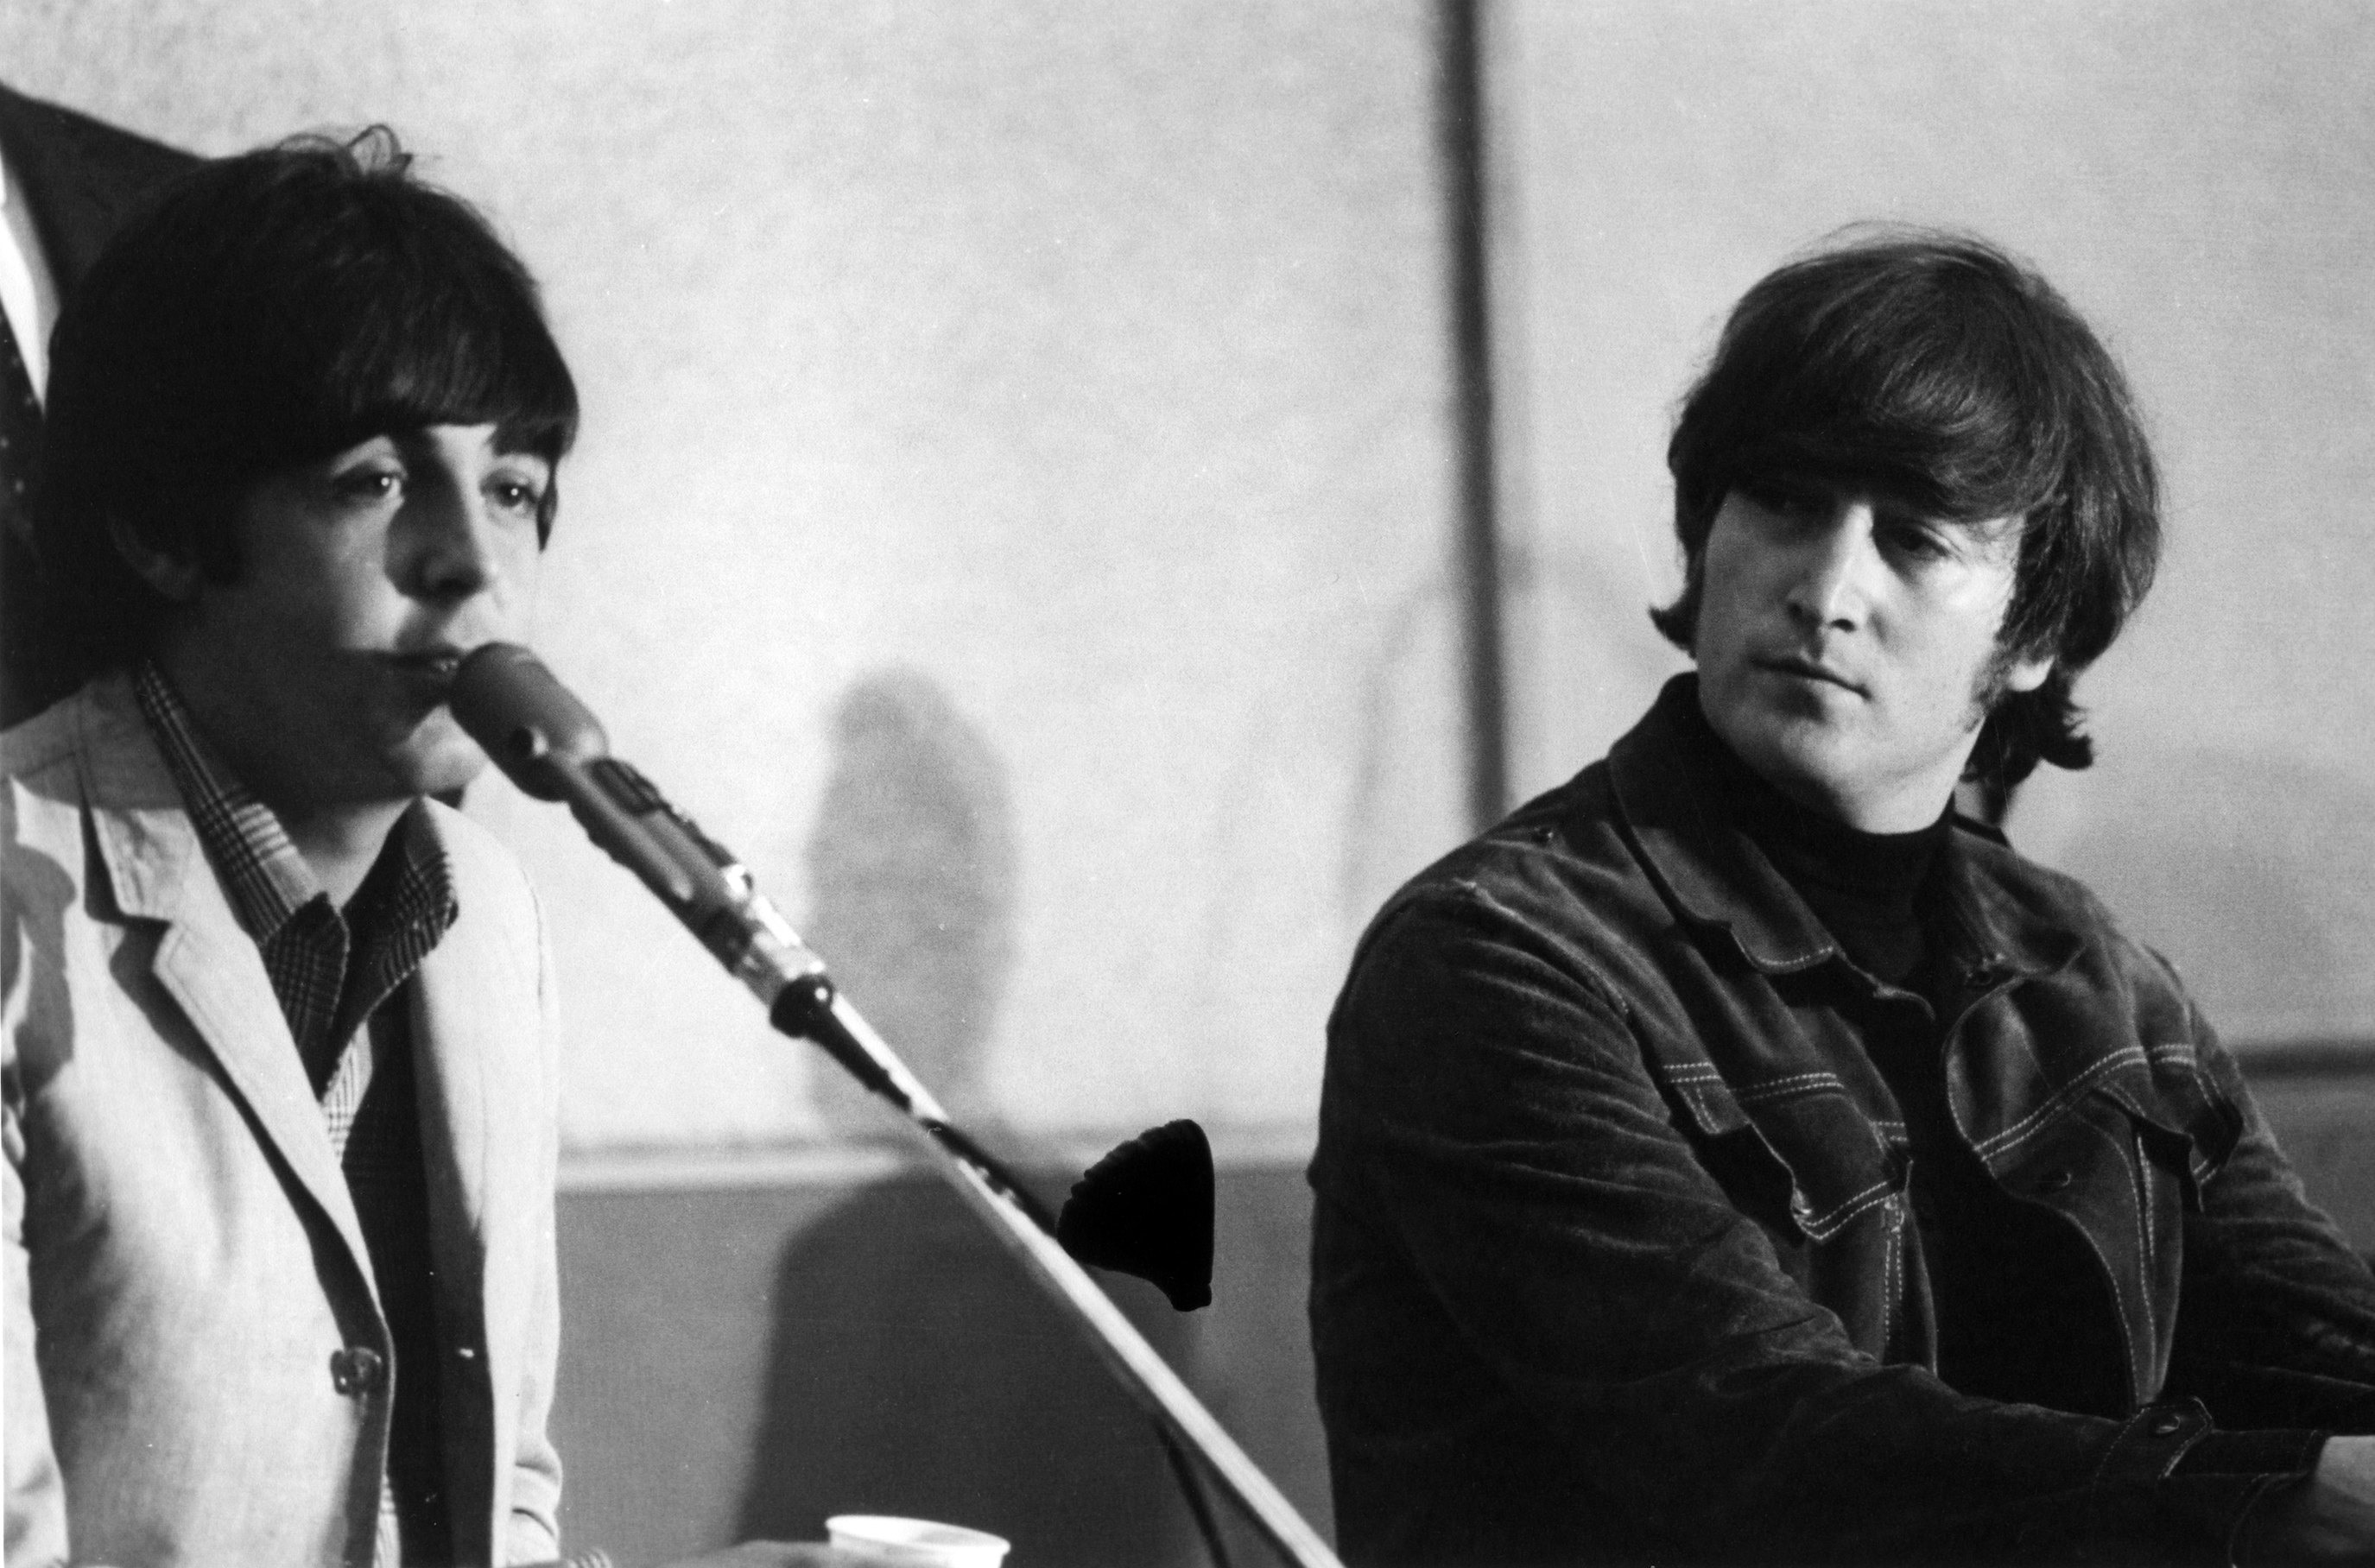 Paul McCartney and John Lennon attend a press conference for 'Help!' in Los Angeles, California